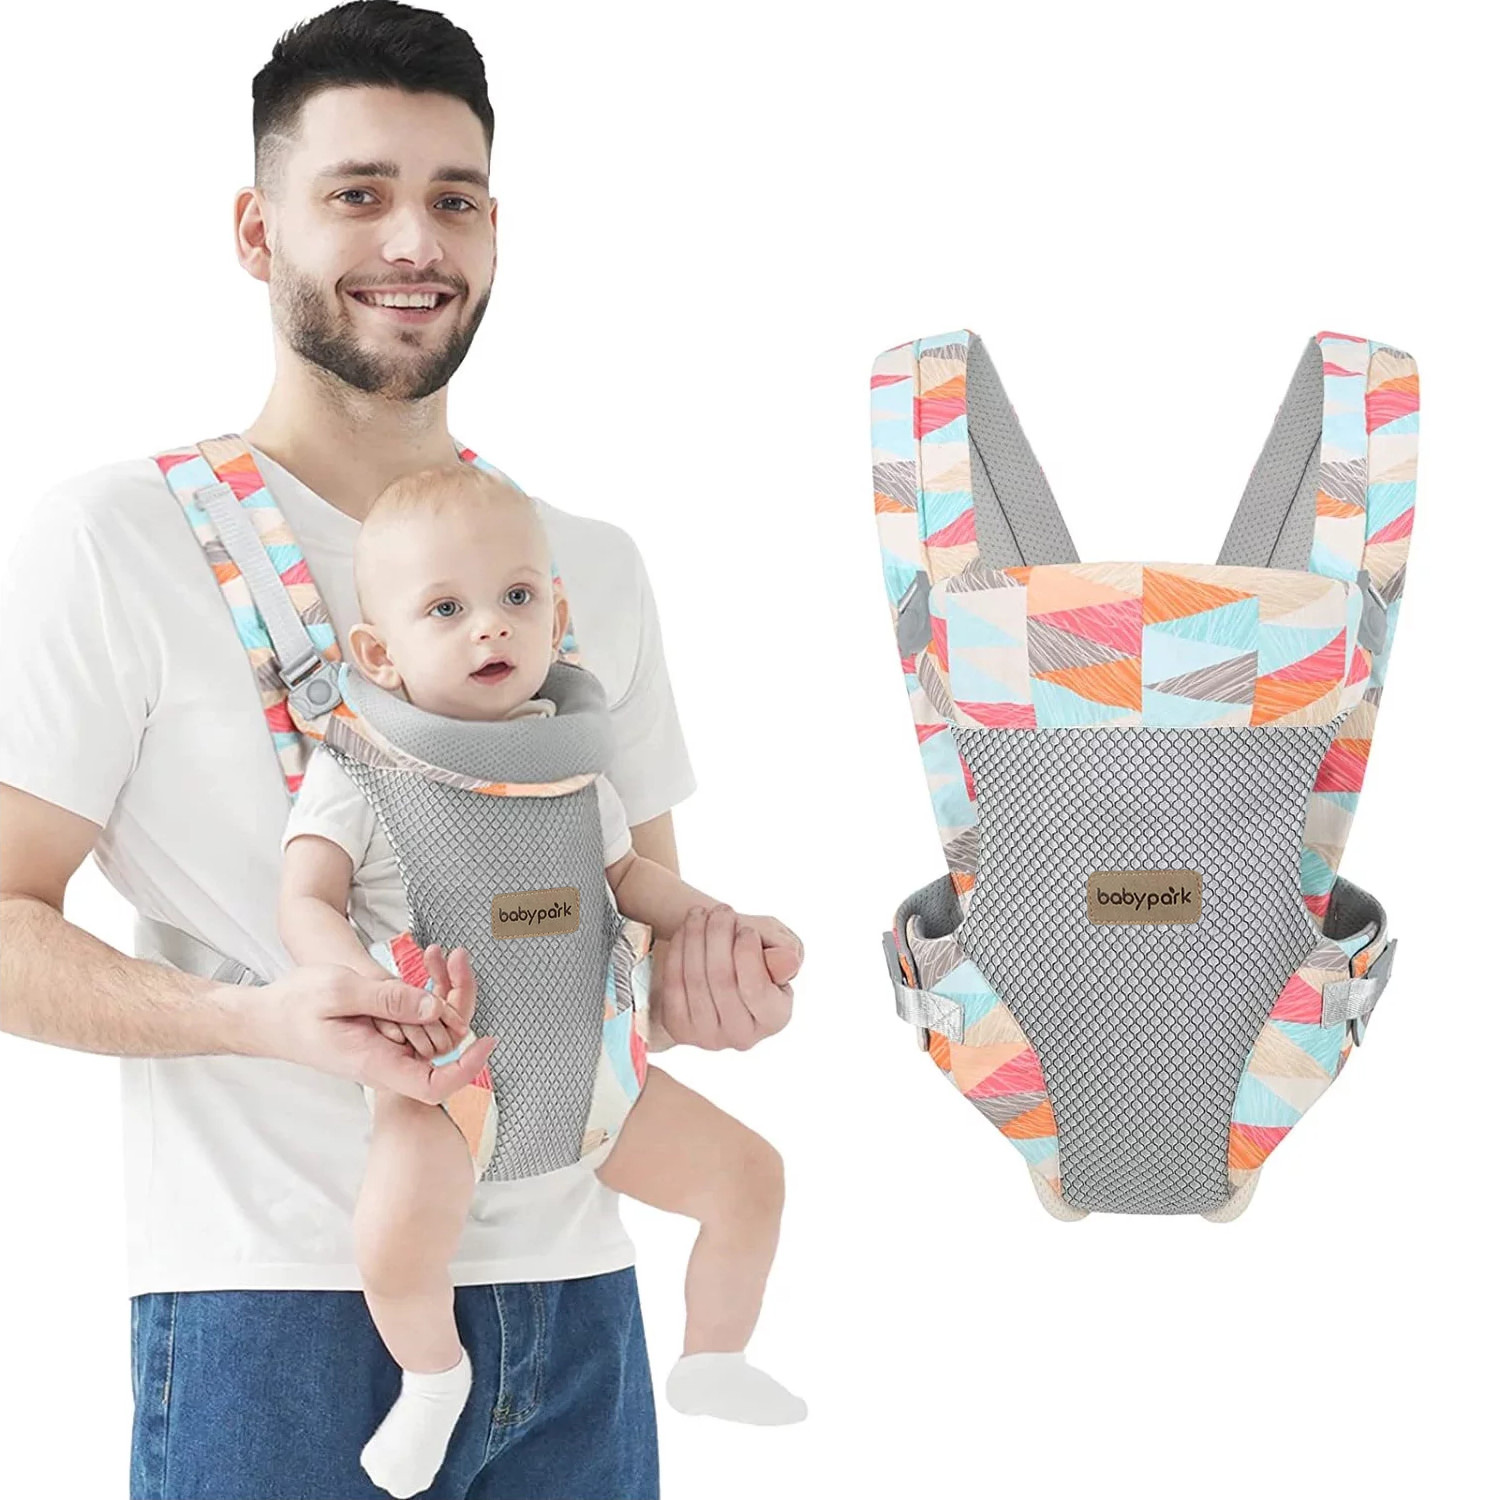 Yadala Baby Carrier, 4-in-1 Colorful Baby Carrier, Front and Back Baby Sling with Adjustable Holder - image 1 of 8